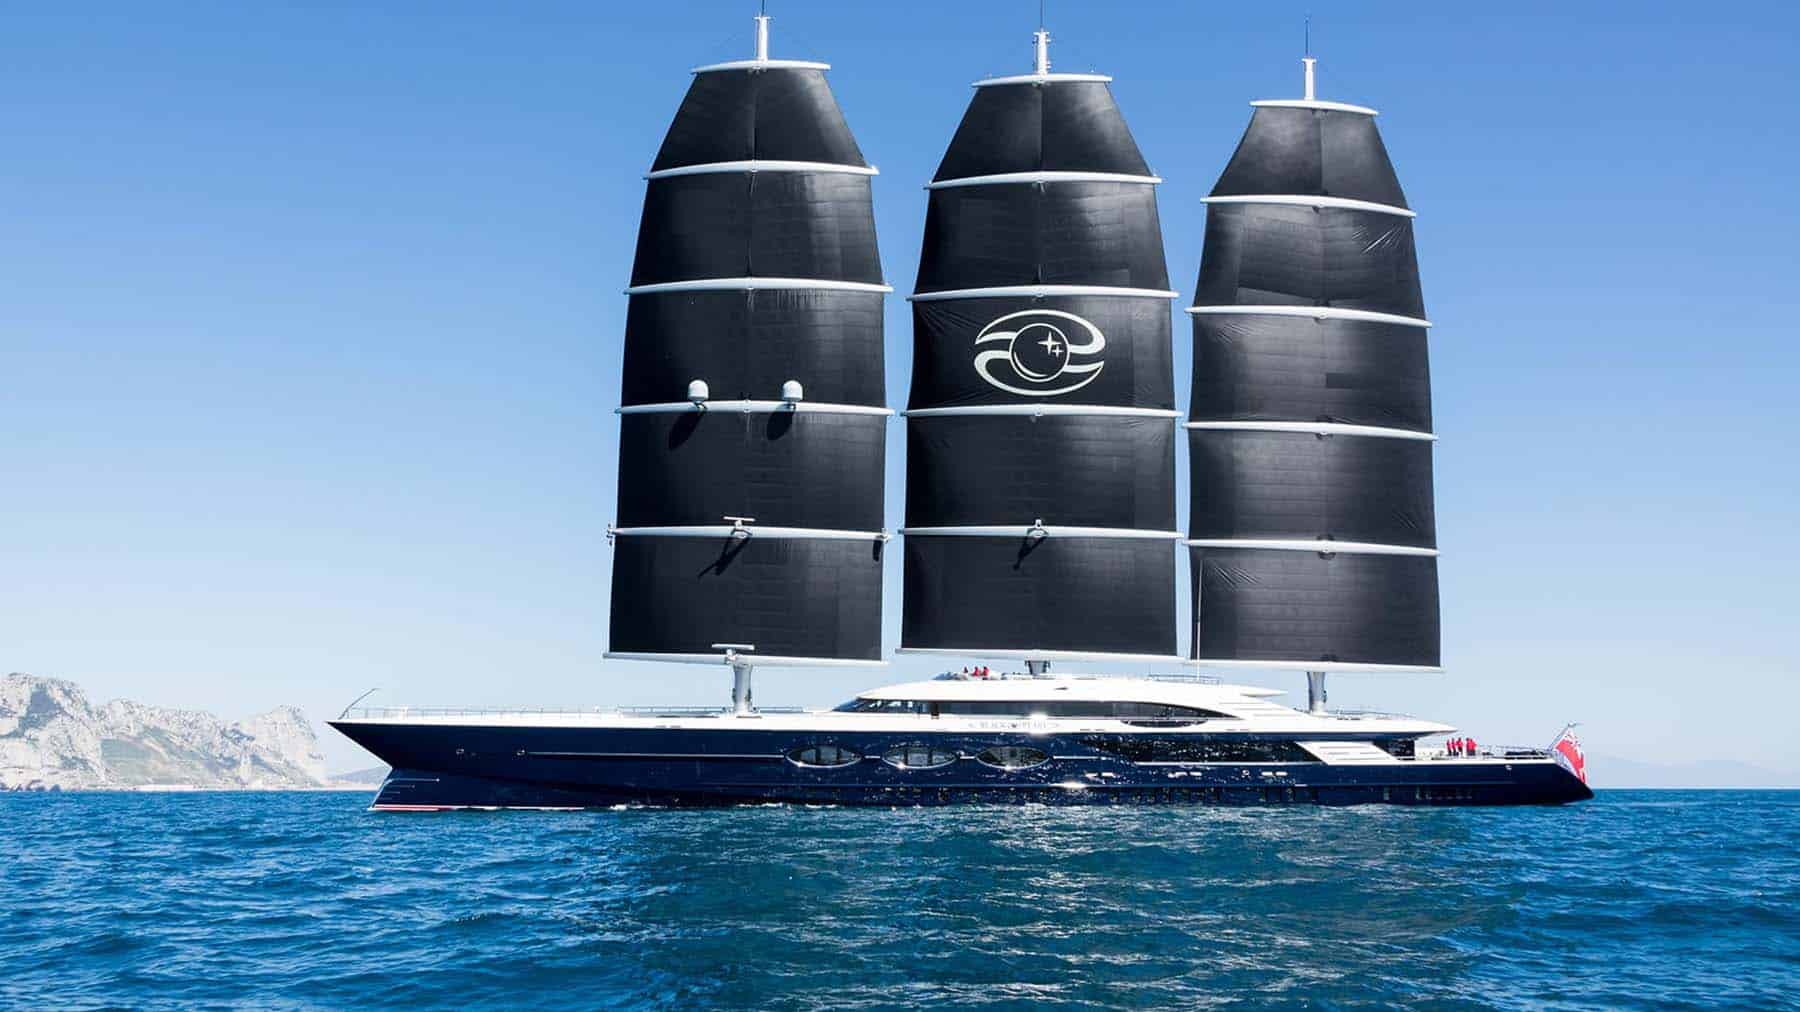 who owns black pearl sailboat